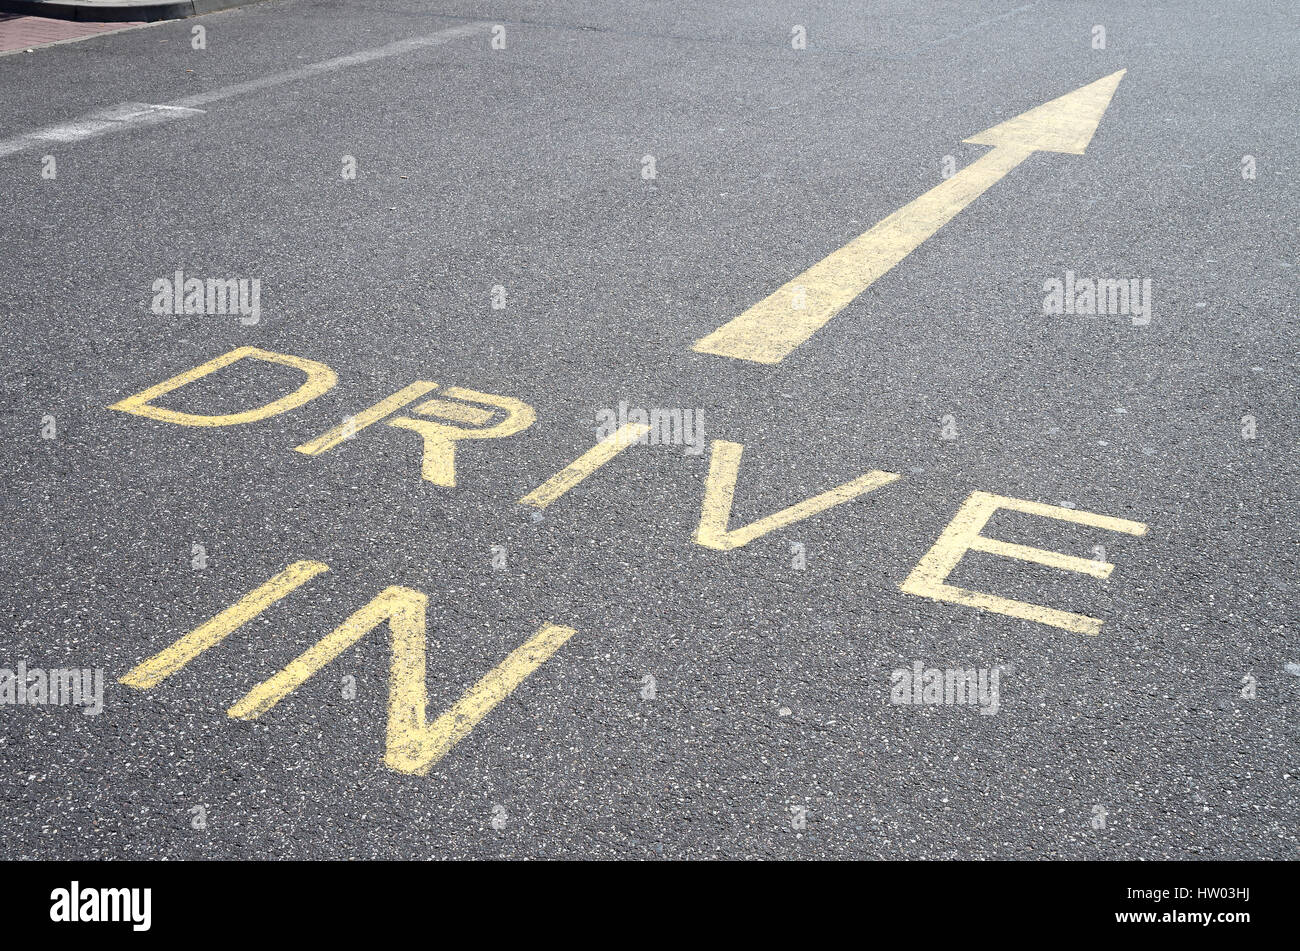 Drive in road marking at a fast food restaurant Stock Photo